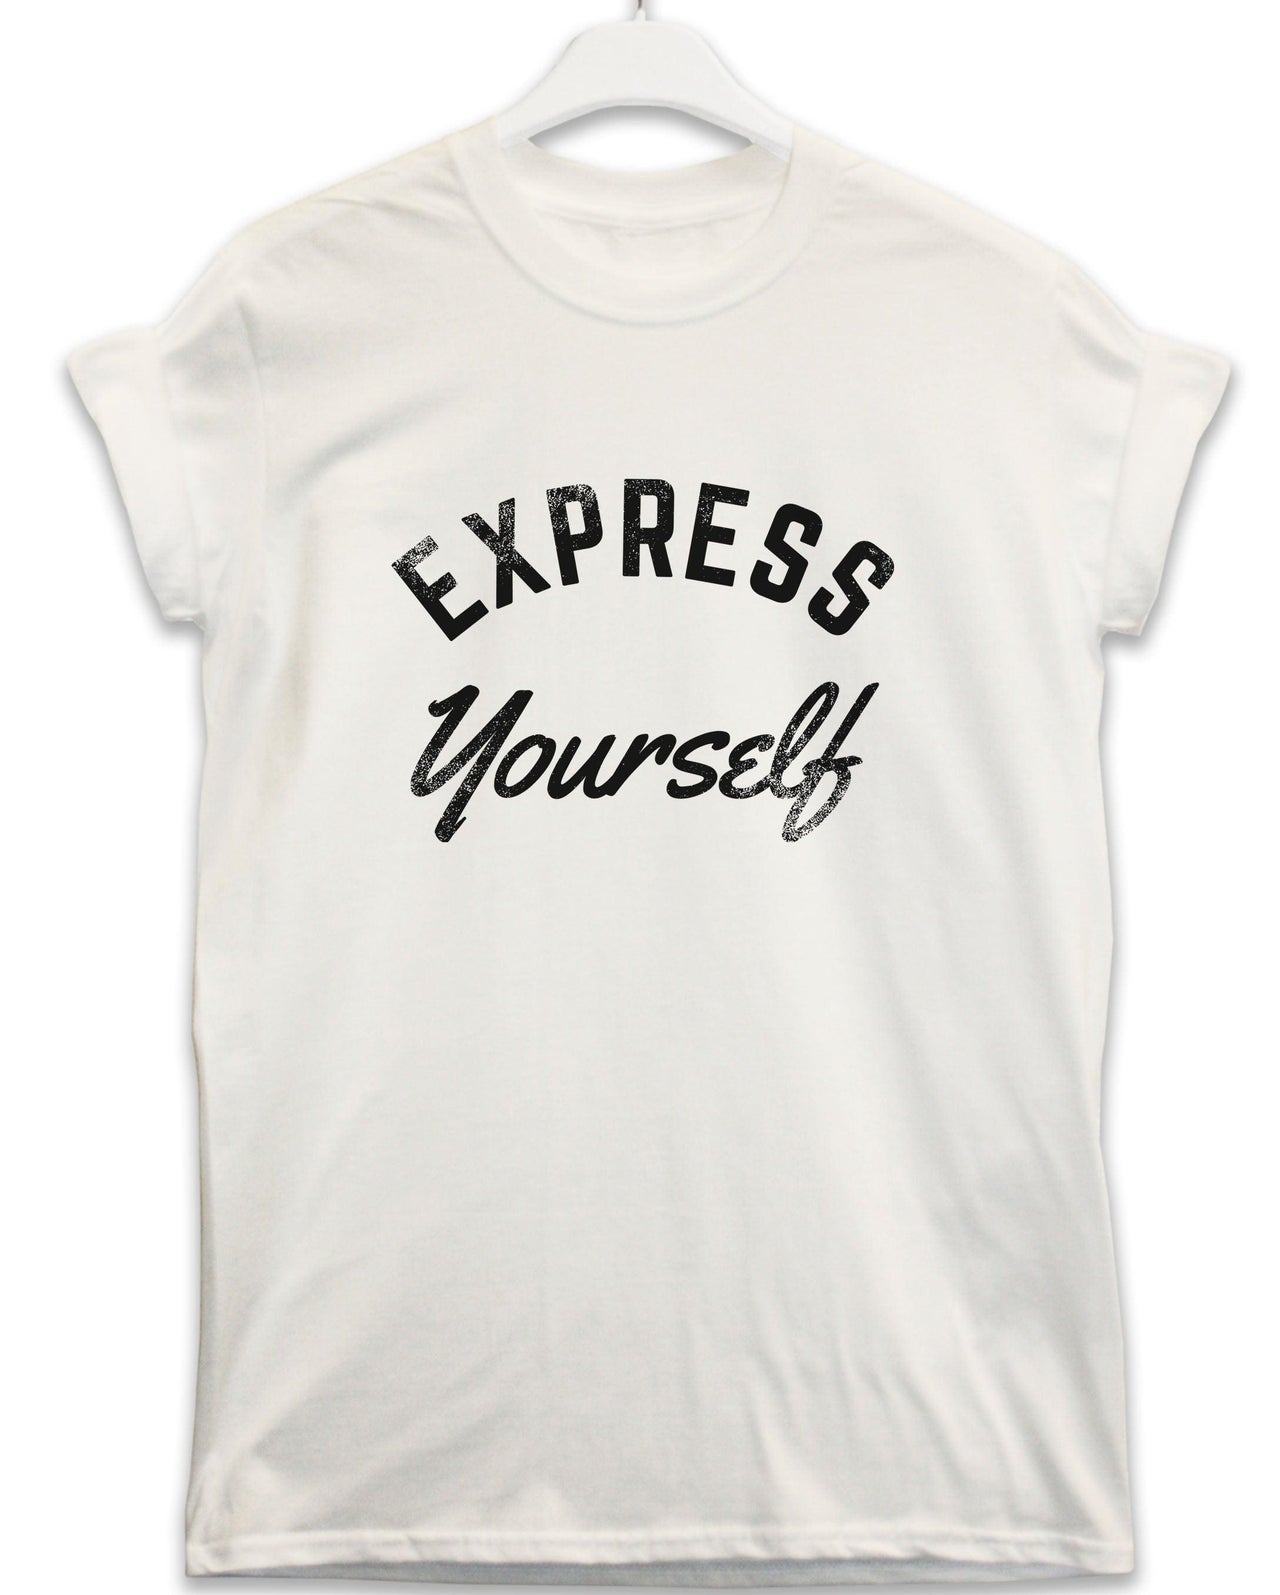 Express Yourself Lyric Quote T-Shirt For Men 8Ball